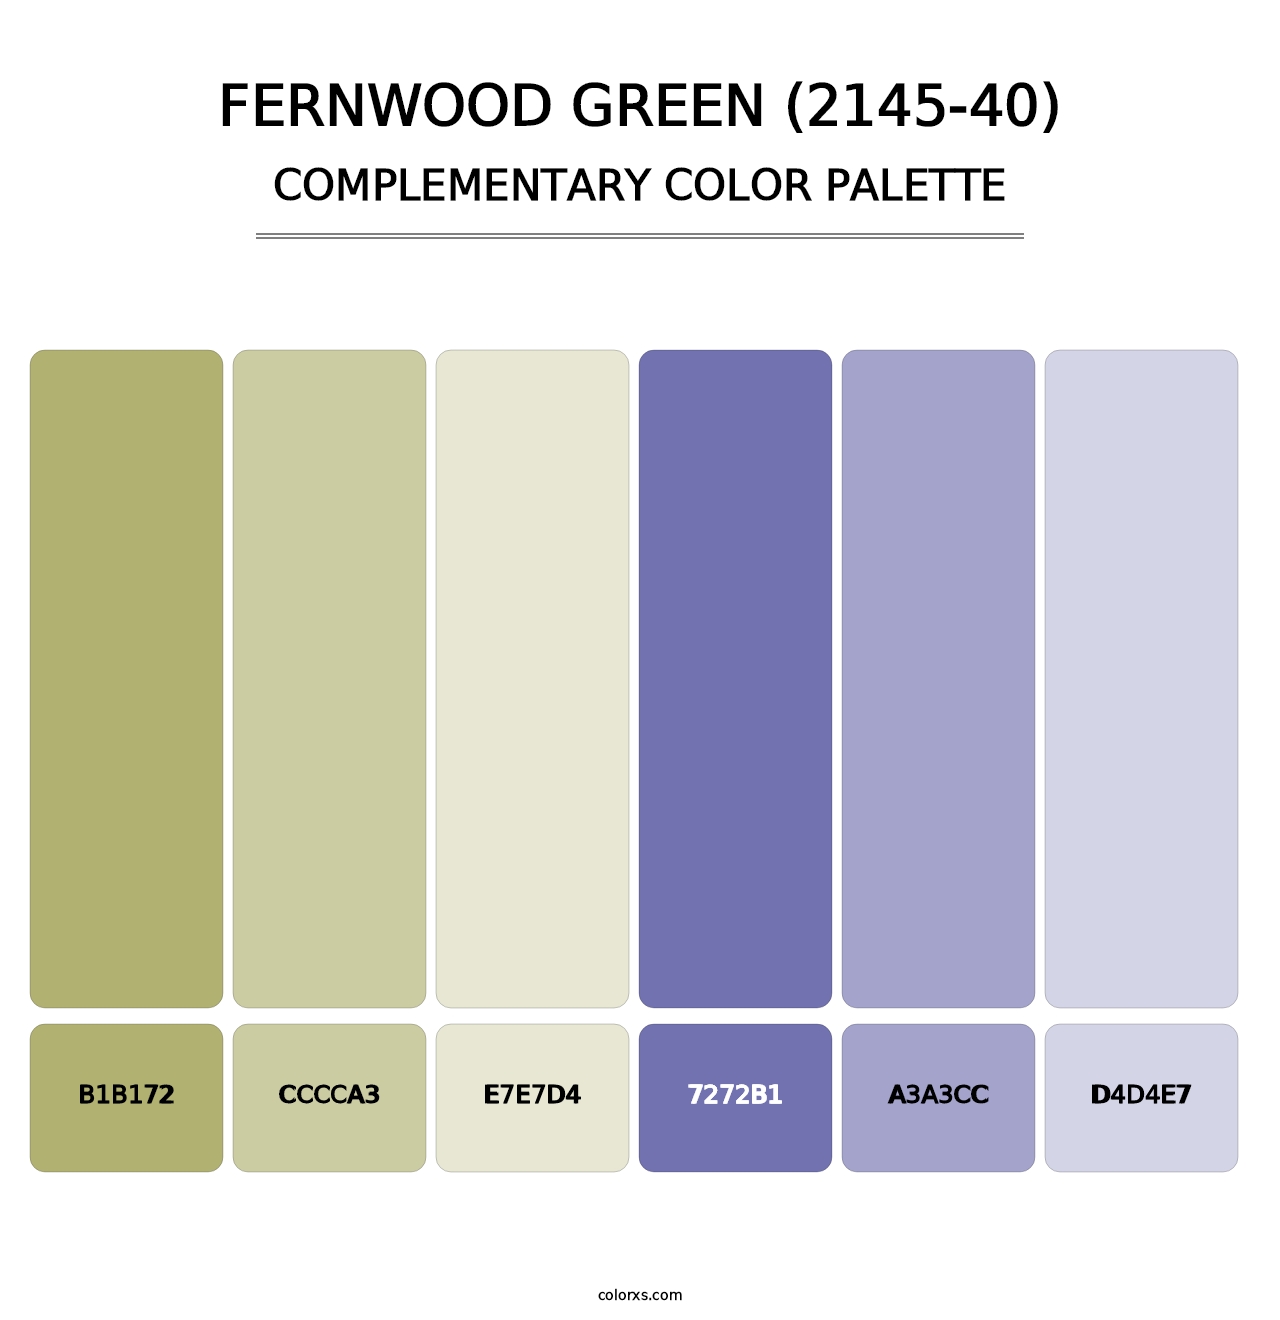 Fernwood Green (2145-40) - Complementary Color Palette